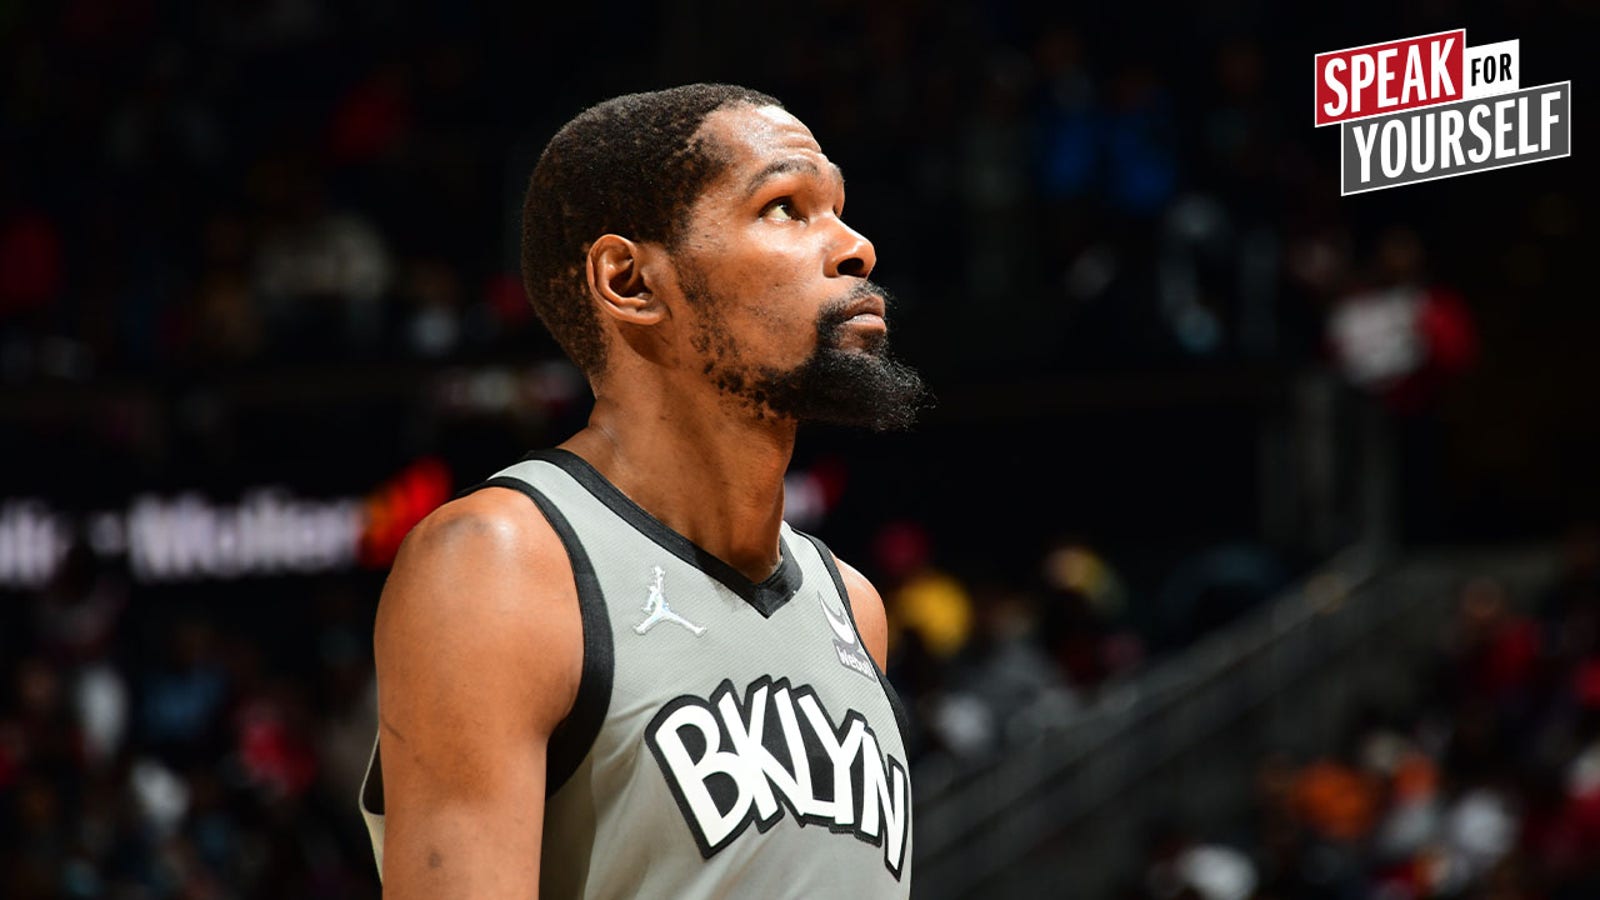 KD's knee injury not solely to blame for Nets' issues